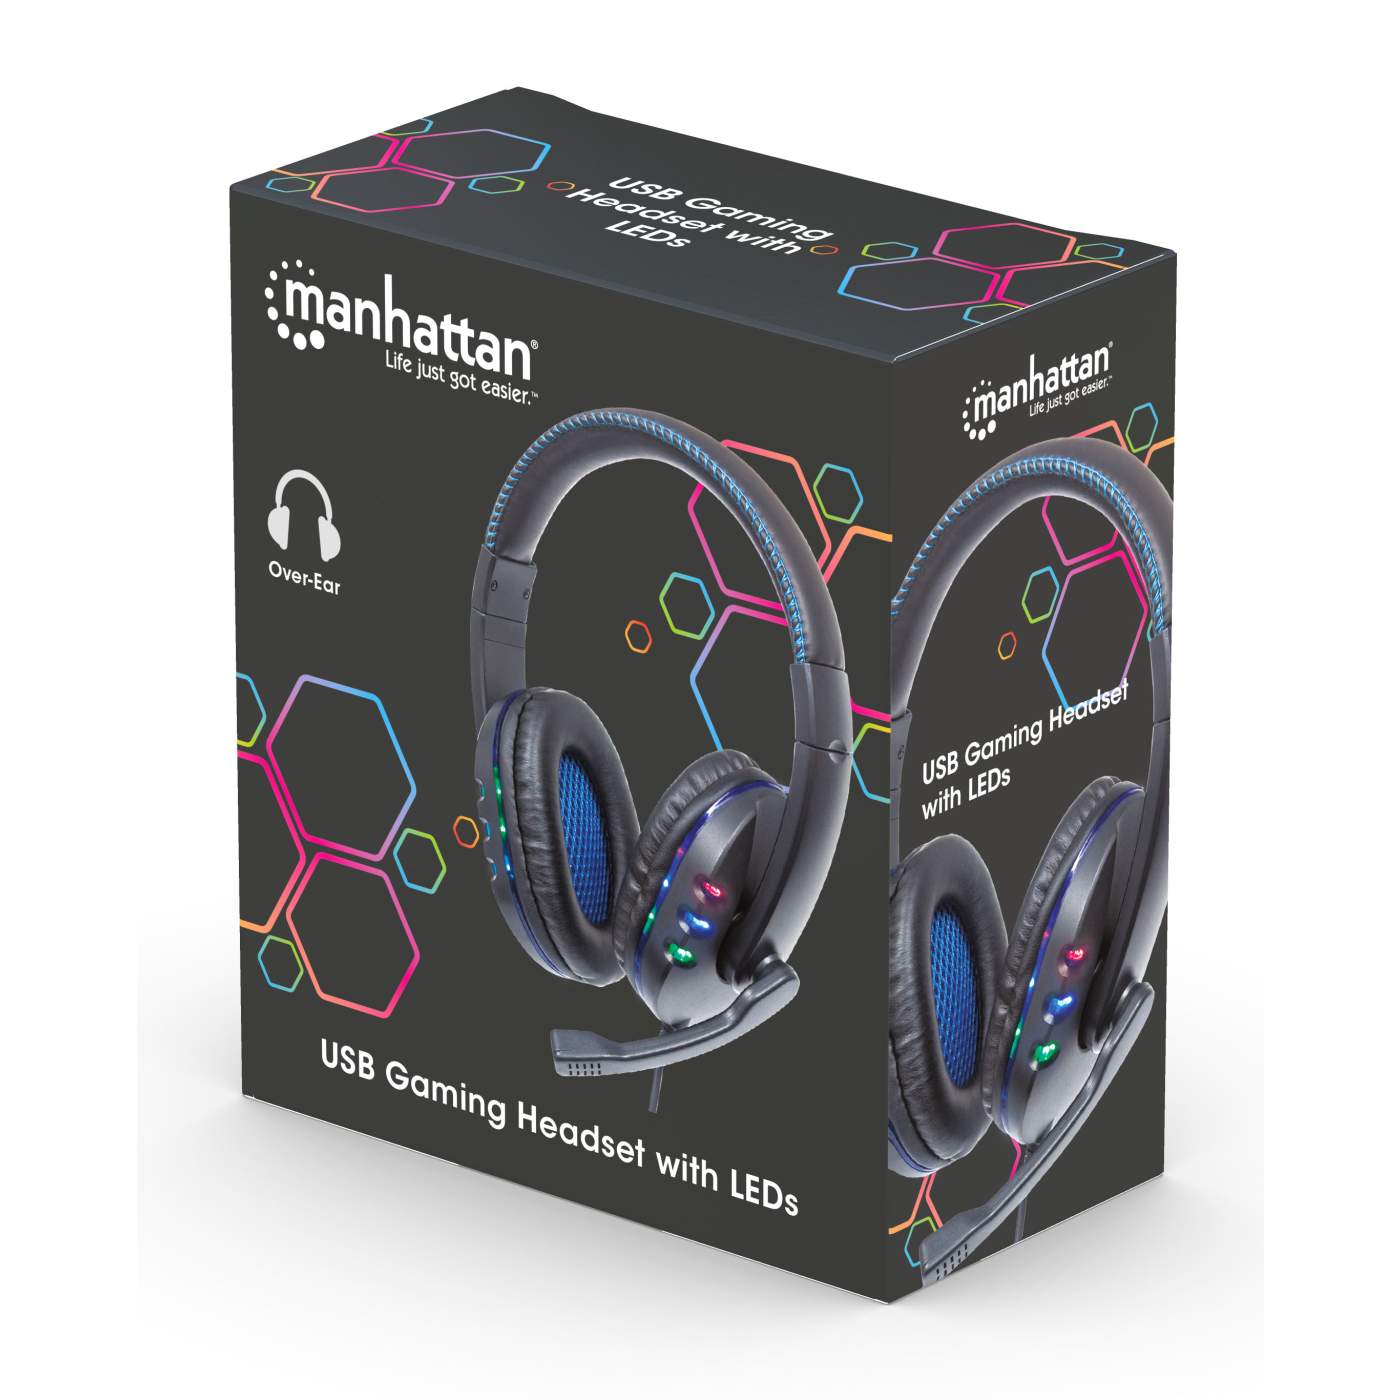 USB Gaming Headset with LEDs Packaging Image 2